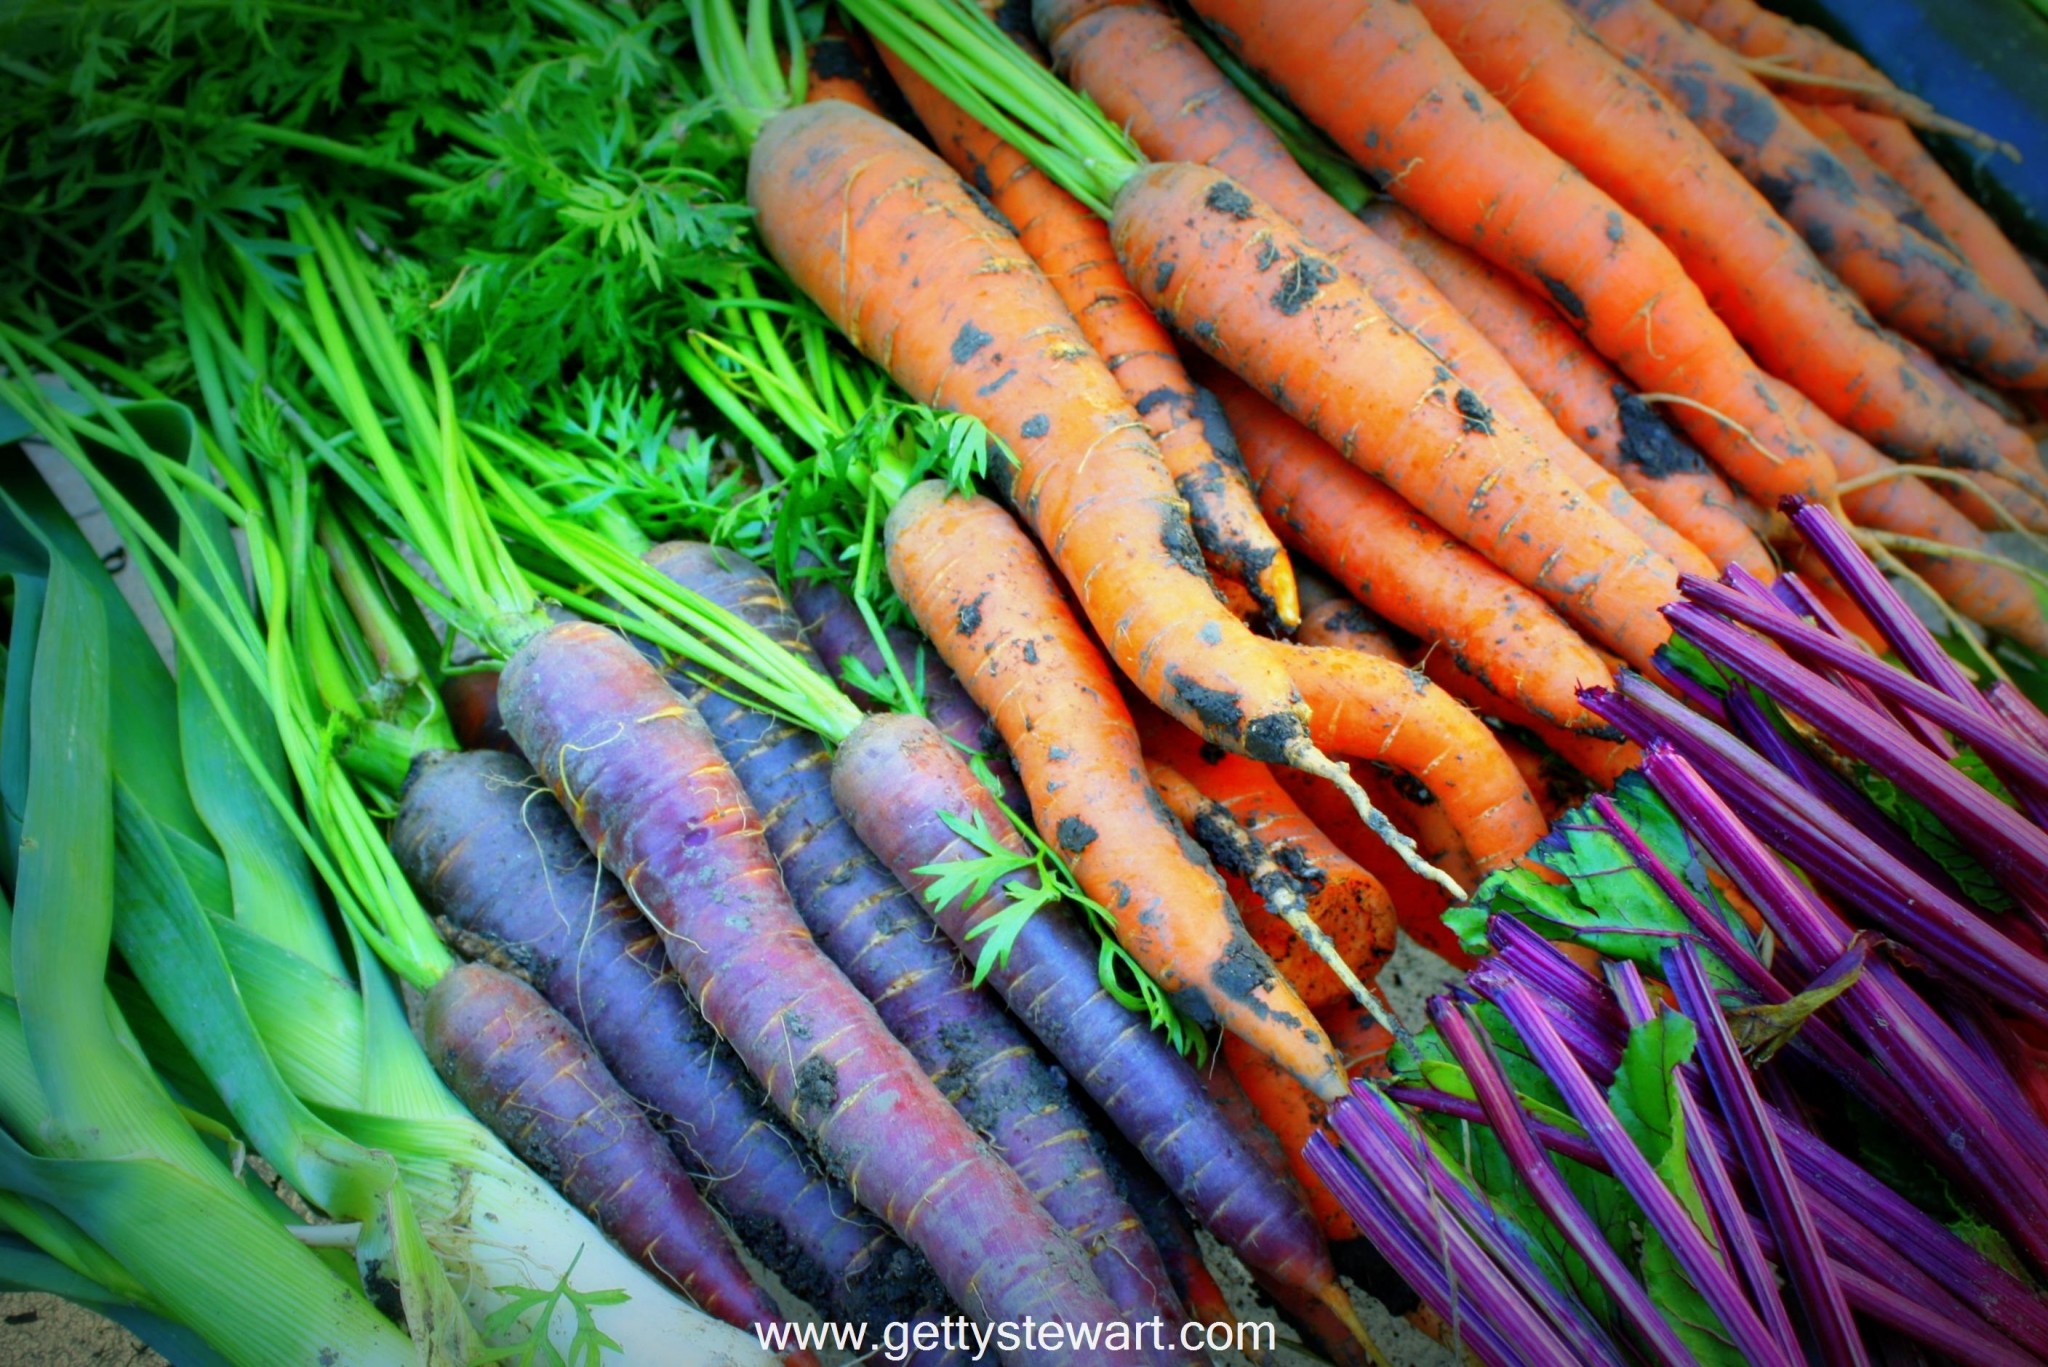 carrots than your able to eat or store without processing? Freezing ...